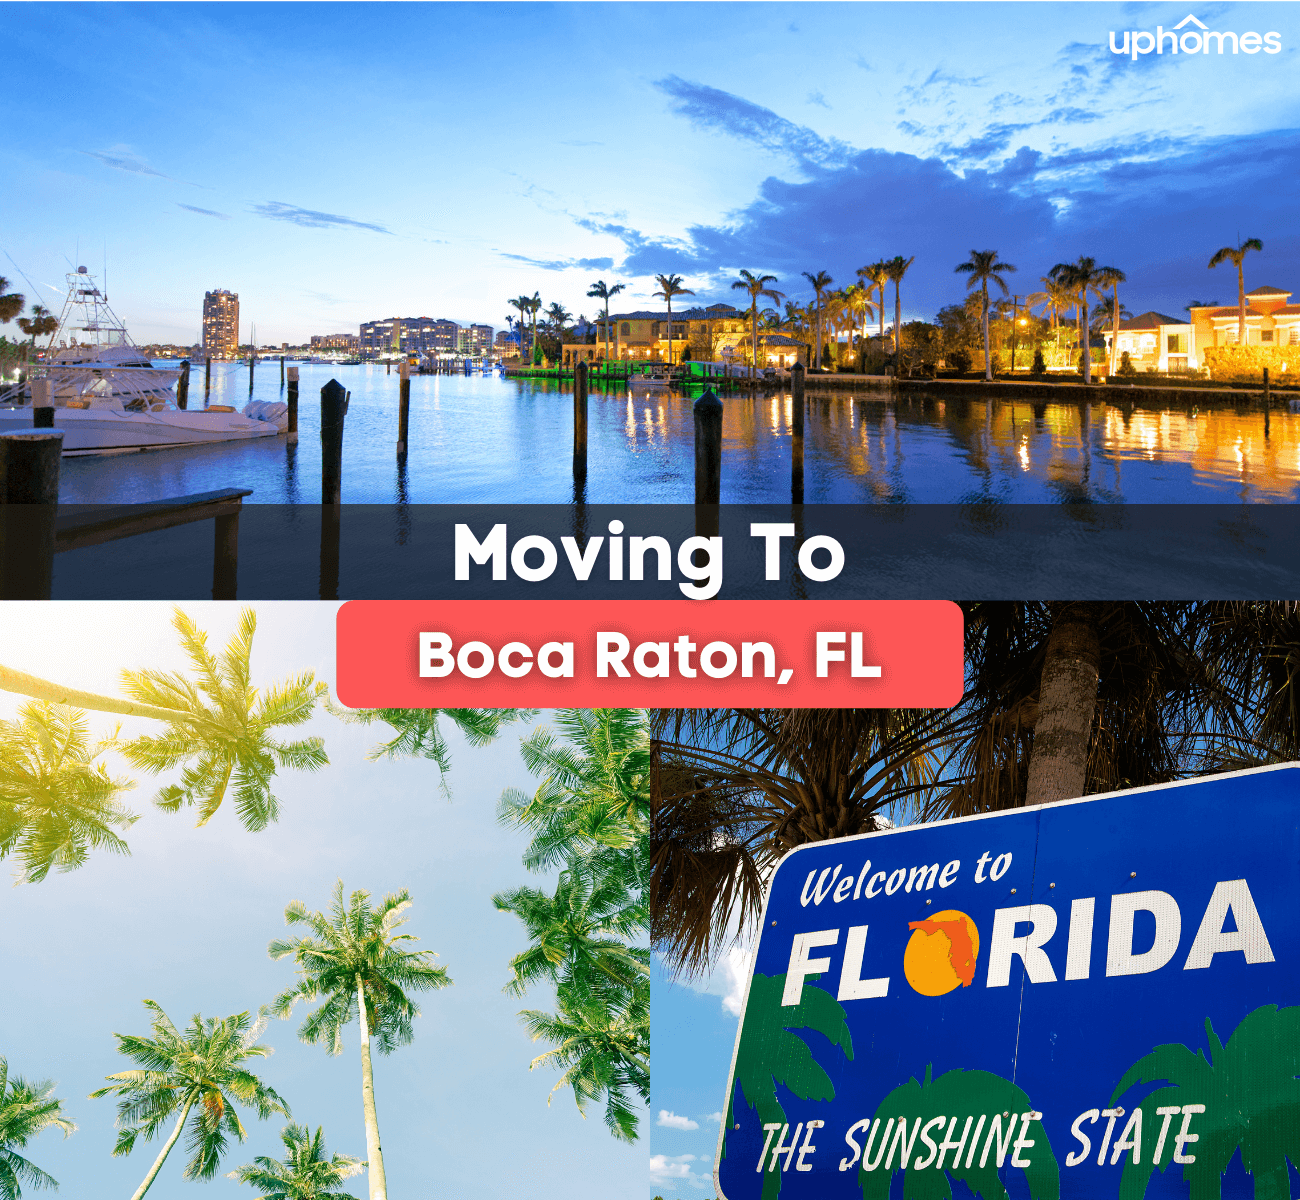 Moving to Boca Raton, FL - What is it like living in Boca Raton, Florida? Is it a nice place to live?